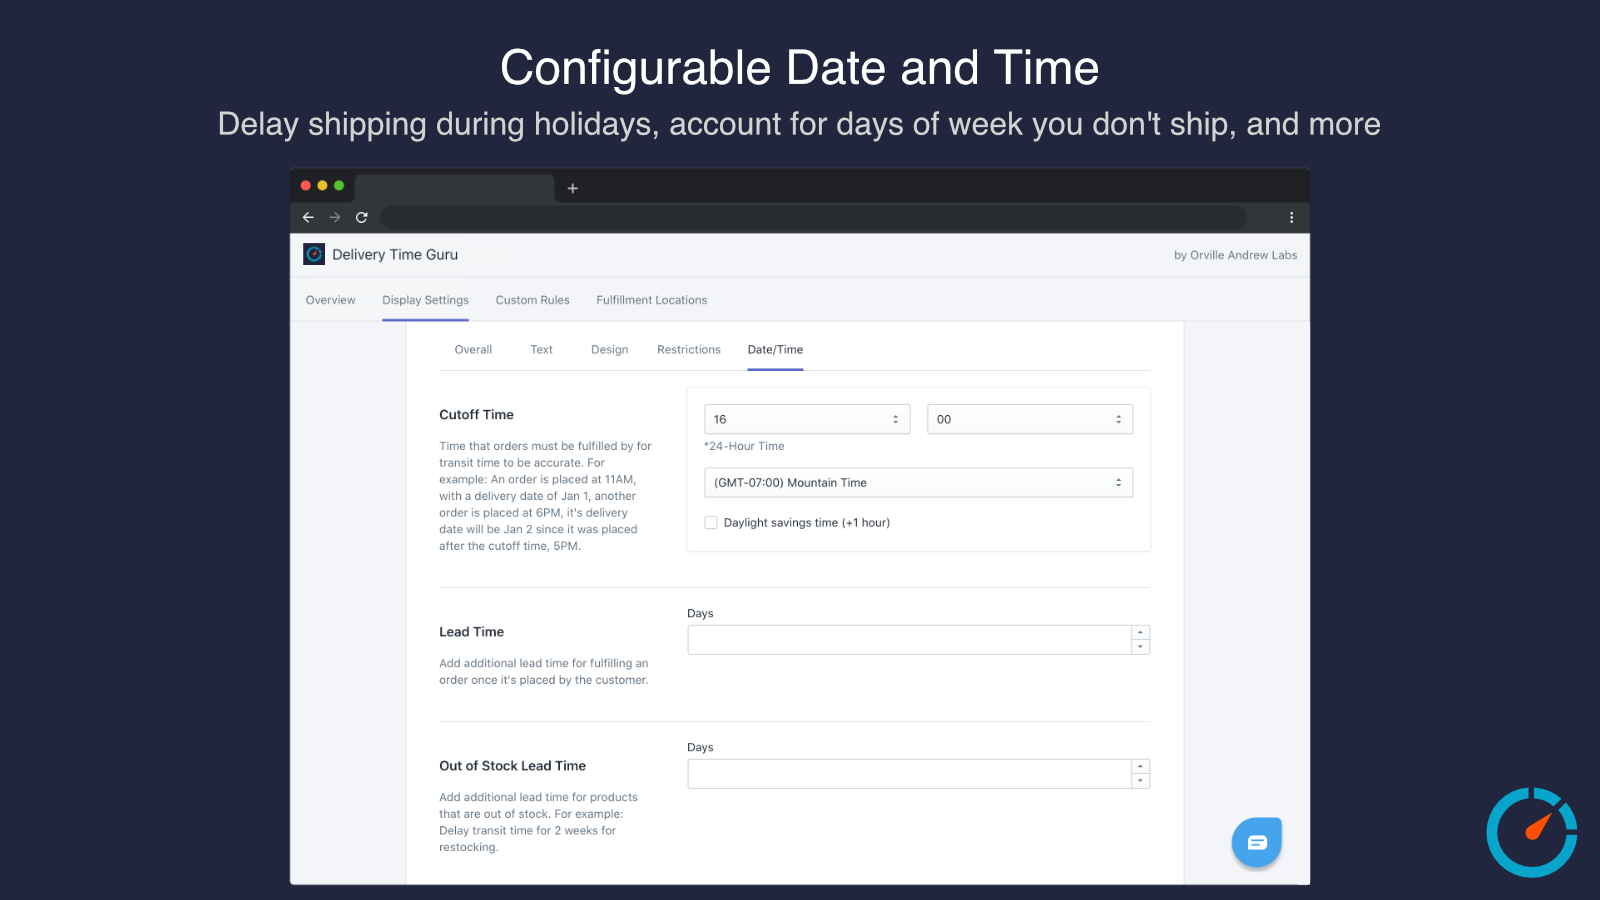 Configurable Date and Time